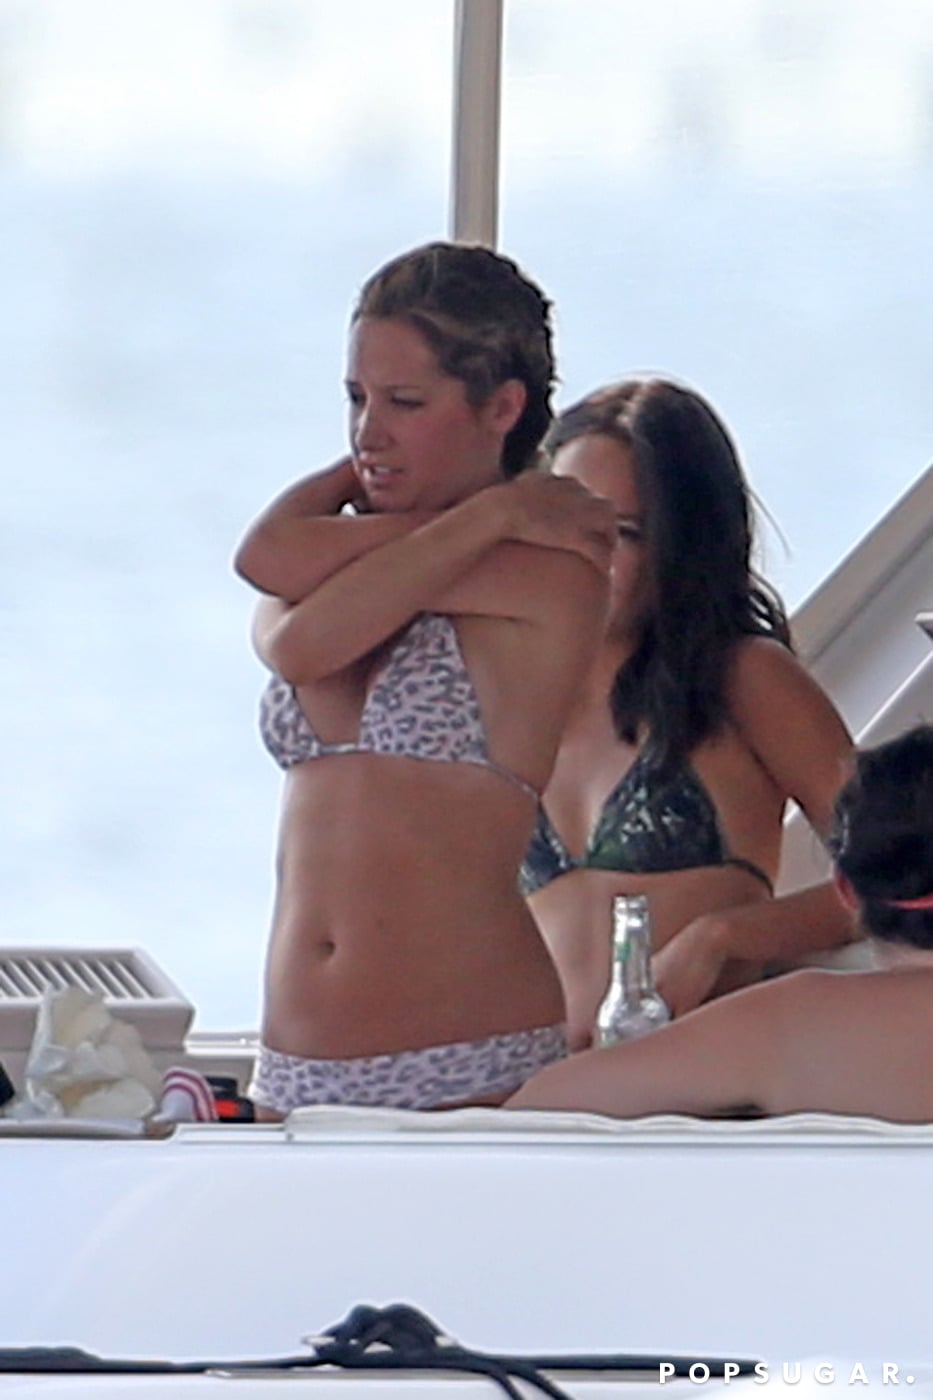 Ashley Tisdale's Bachelorette Weekend on a Yacht in Miami